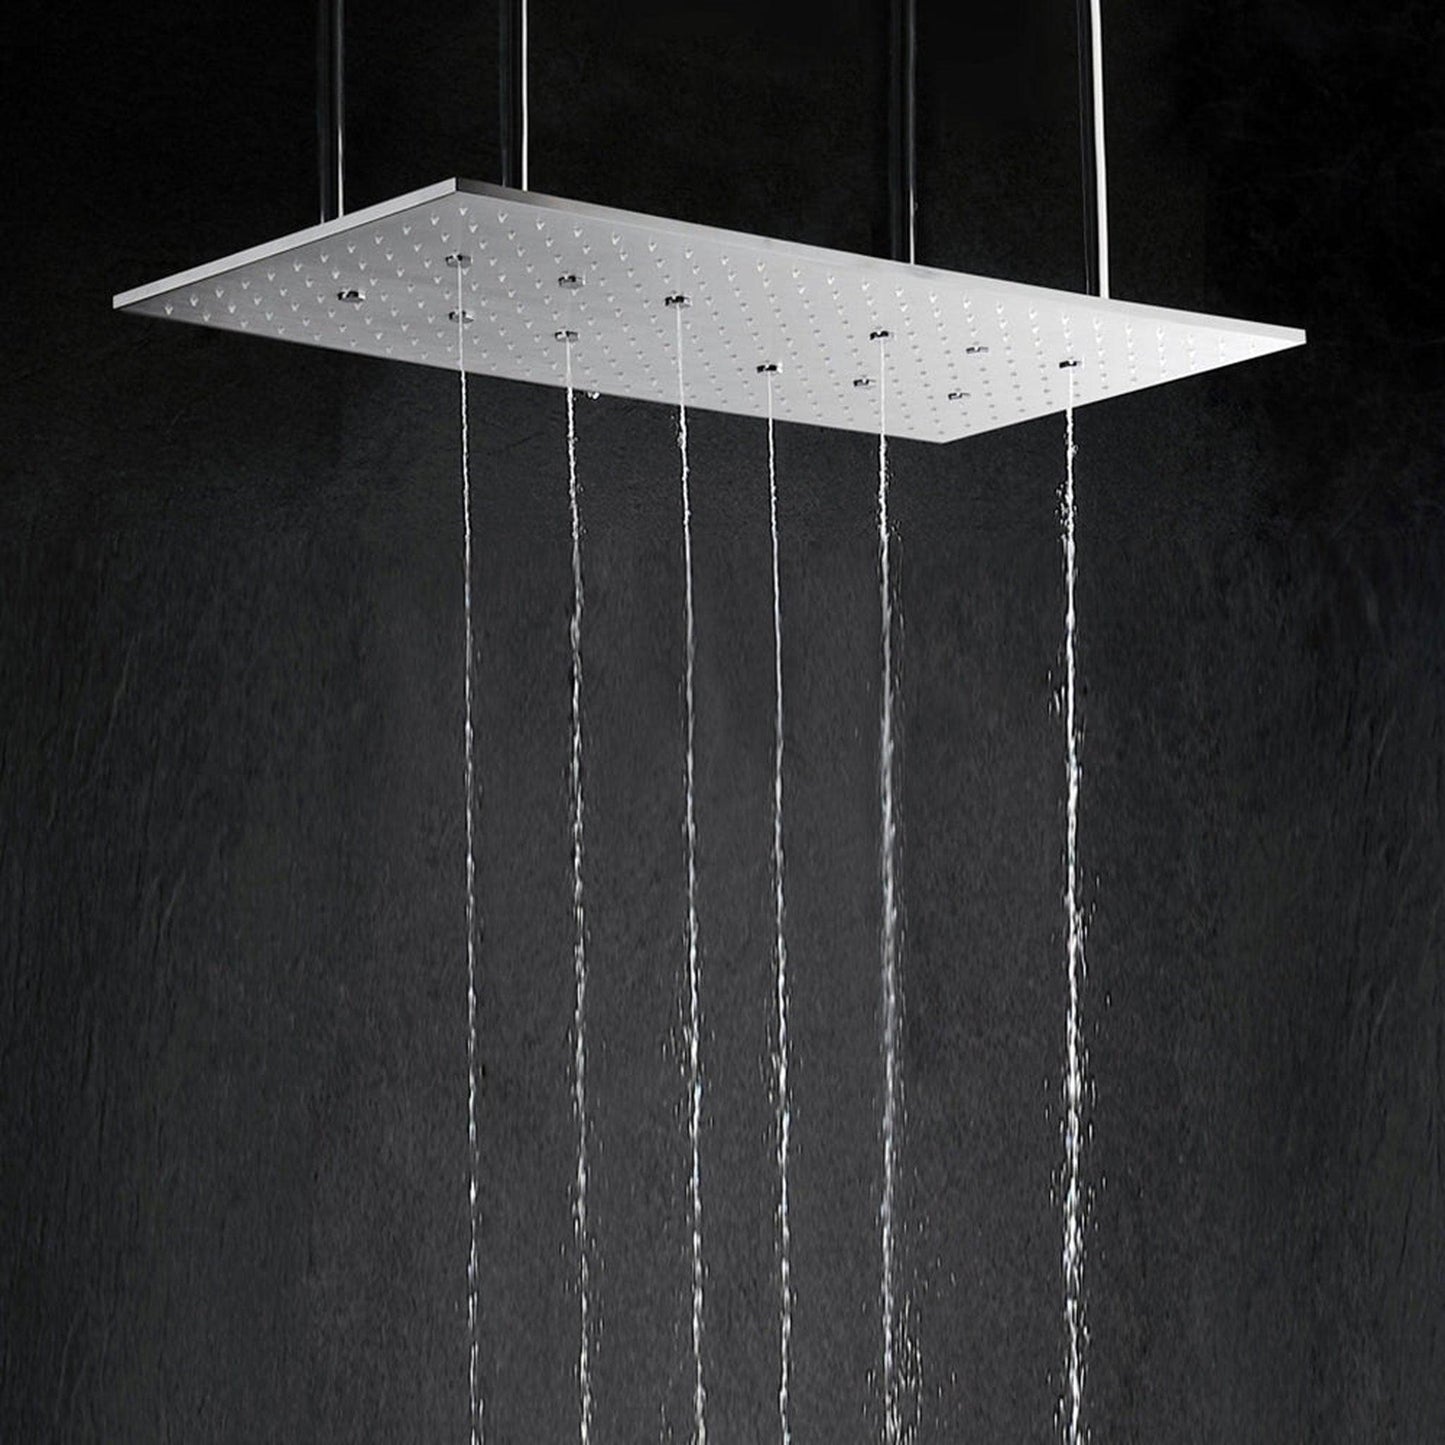 FontanaShowers Verona Creative Luxury Chrome Rectangular Ceiling Mounted Shower Head Atomizing, Swash and Rainfall Temperature Controlled LED Shower System With Hand Shower